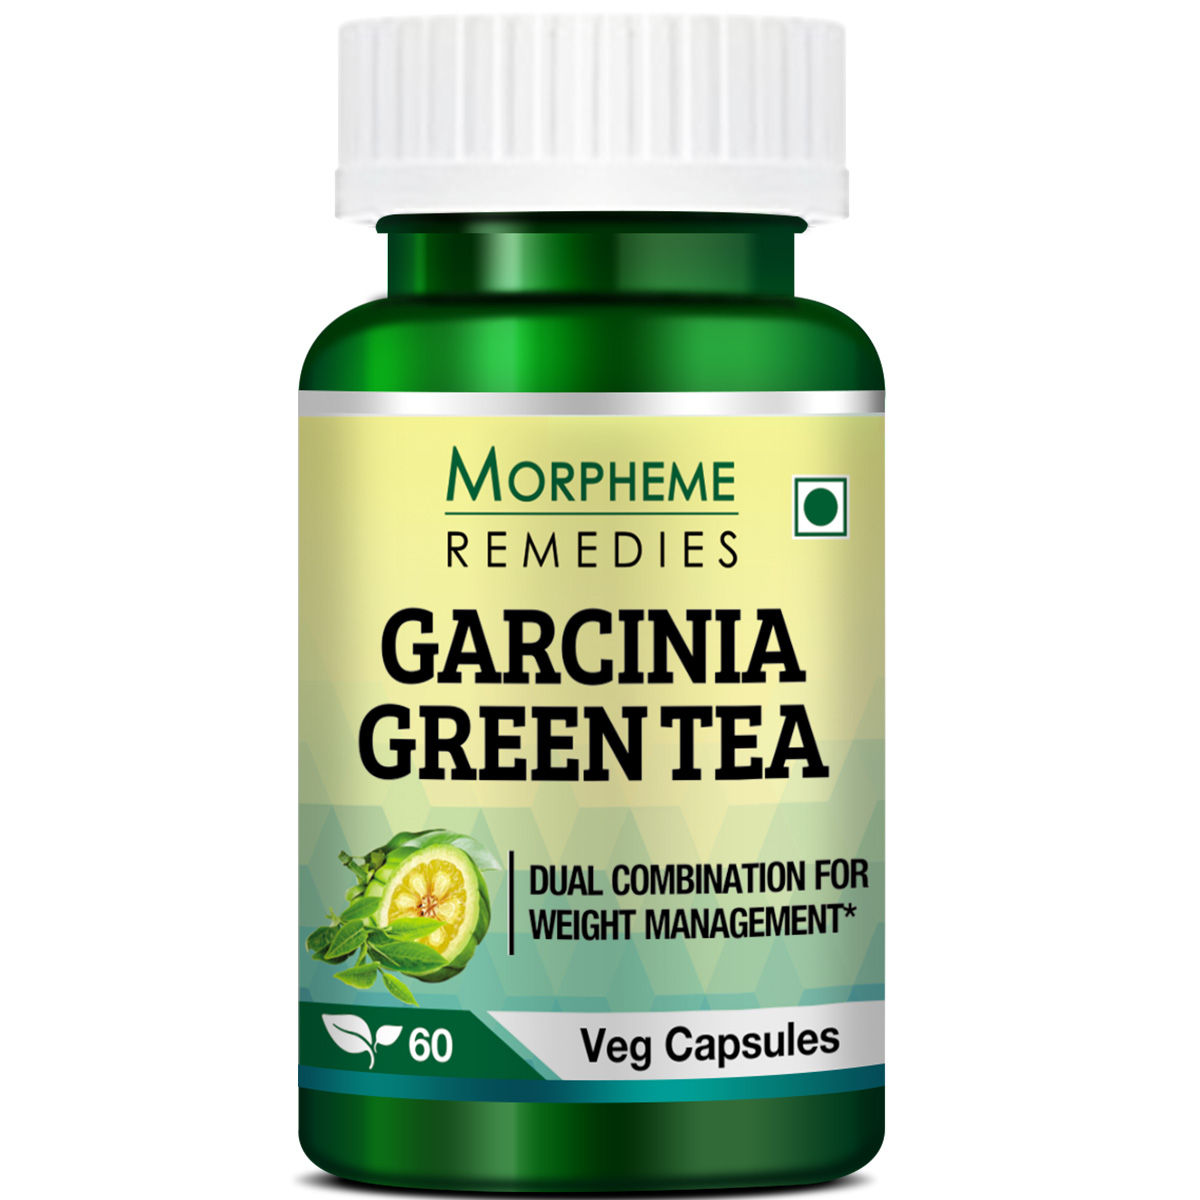 Morpheme Remedies Garcinia Cambogia Green Tea -Dual Combinations For Weight Management - 500mg Extract